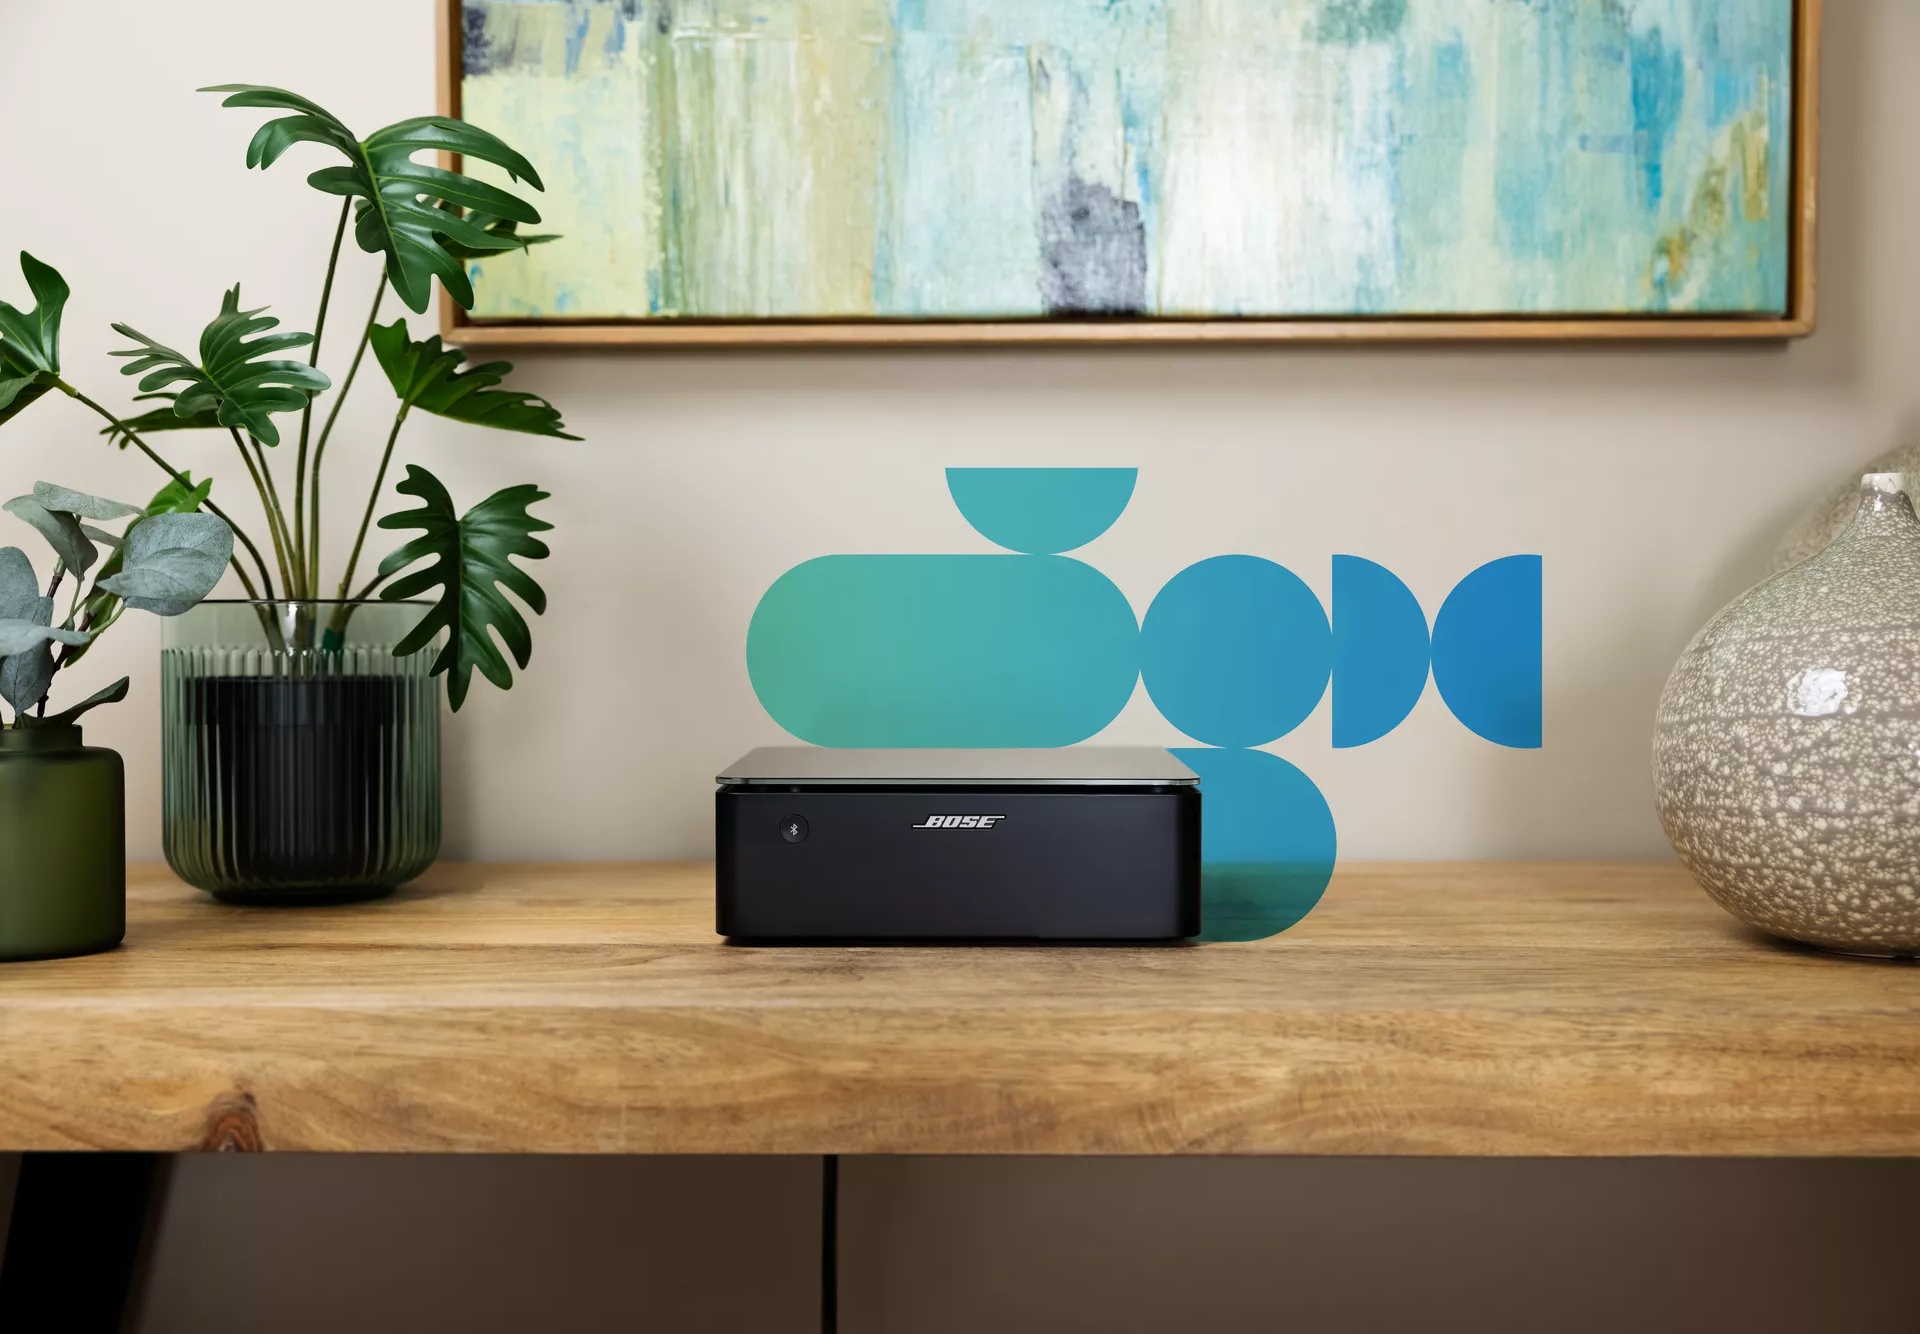 How the Bose Music Amplifier marries analog and digital sound